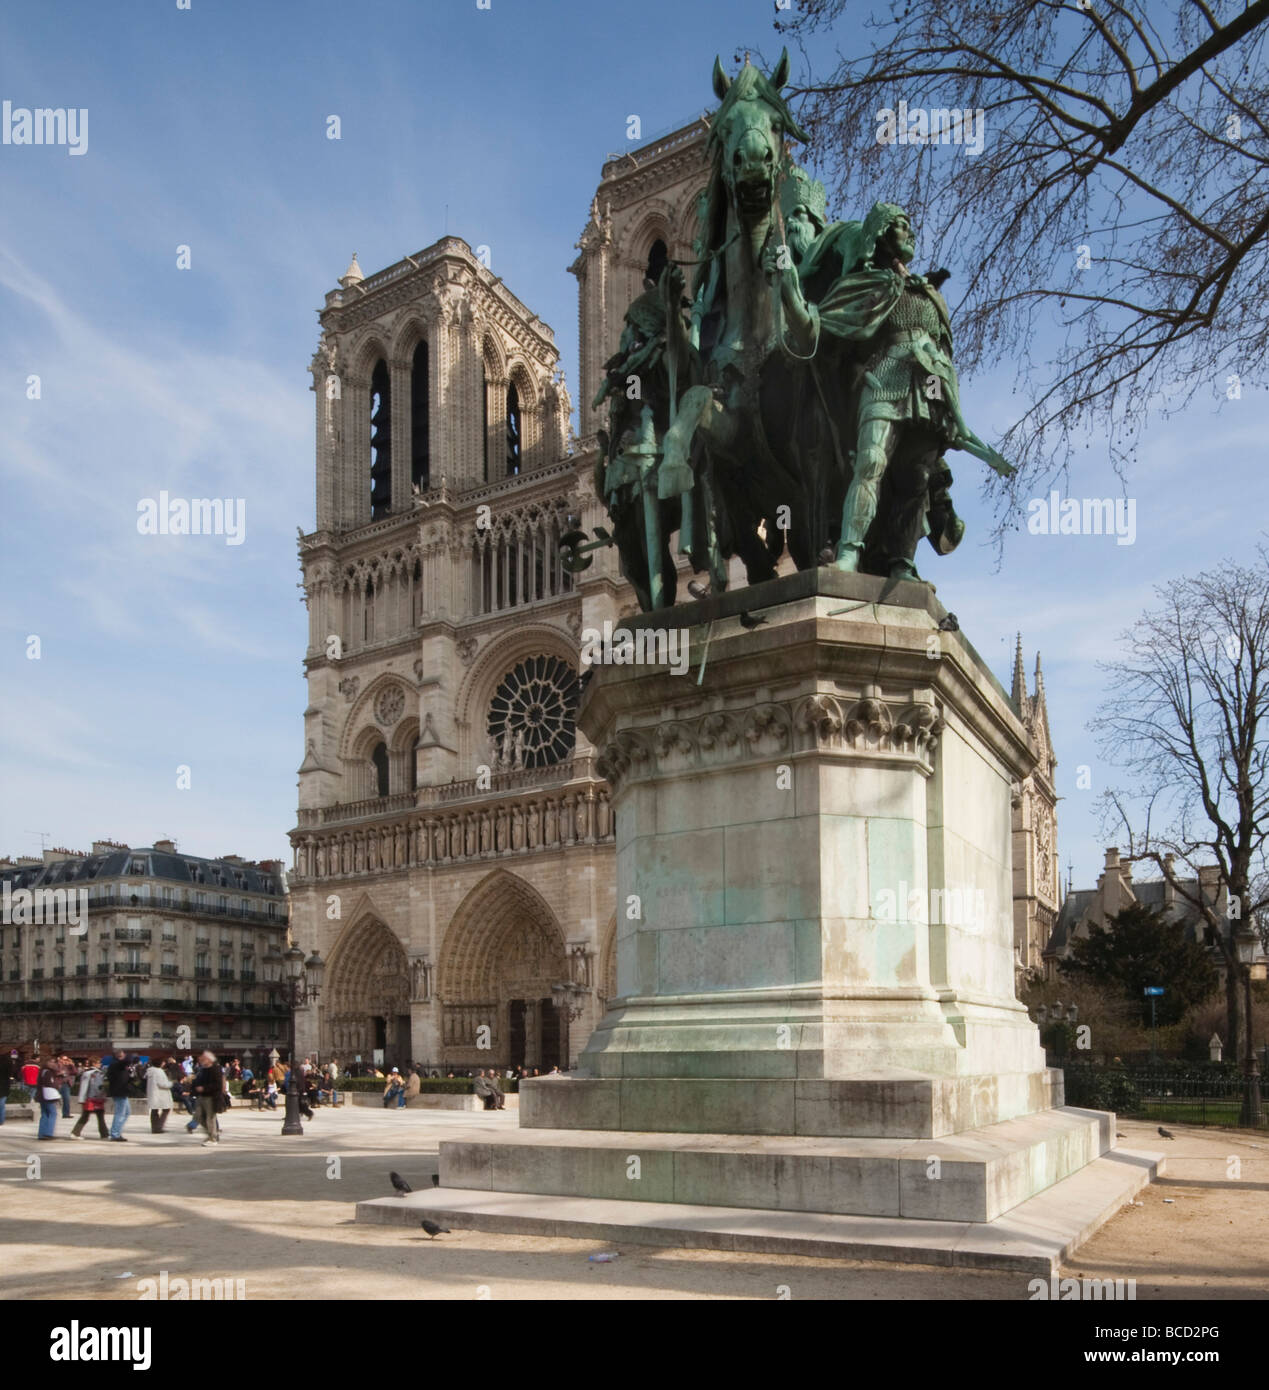 A view of Notre Dame and the statue of Charlemagne on the Ile de la Cite Paris France Stock Photo